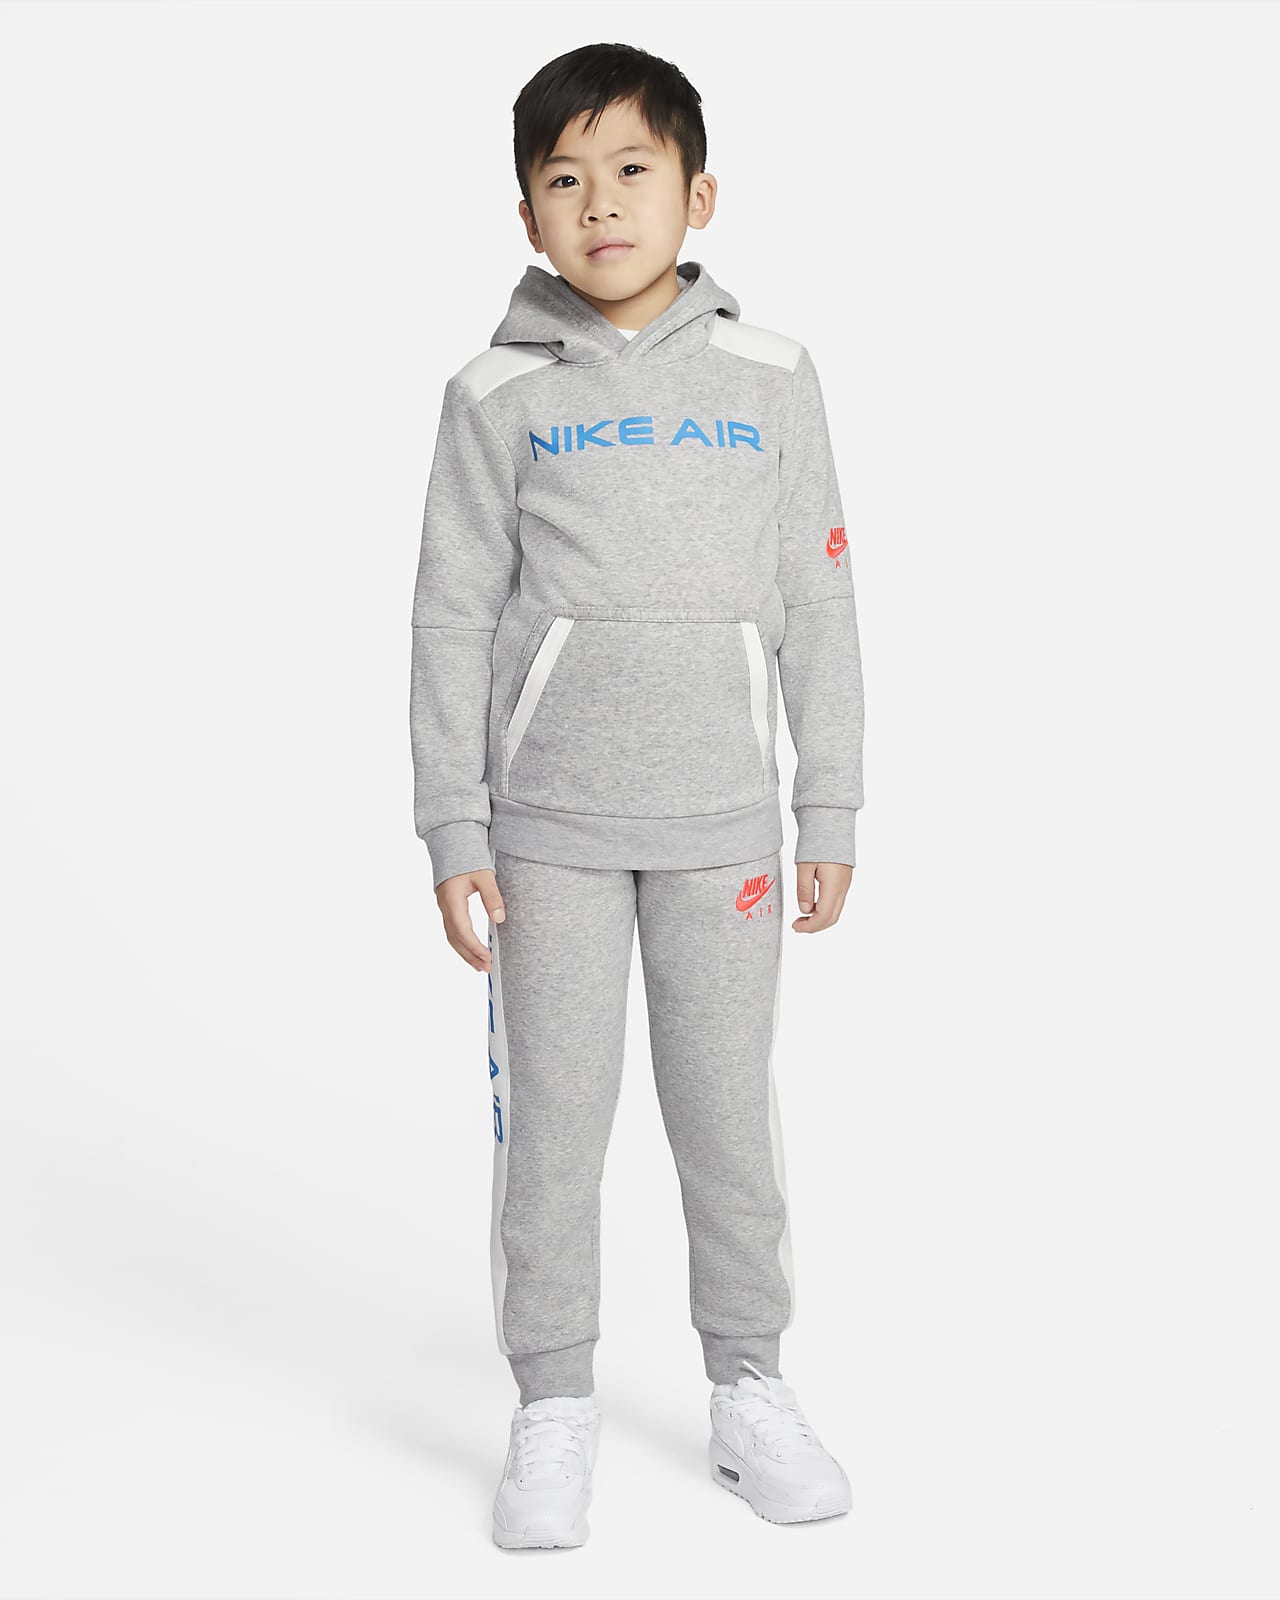 Nike Air Younger Kids' Hoodie and 